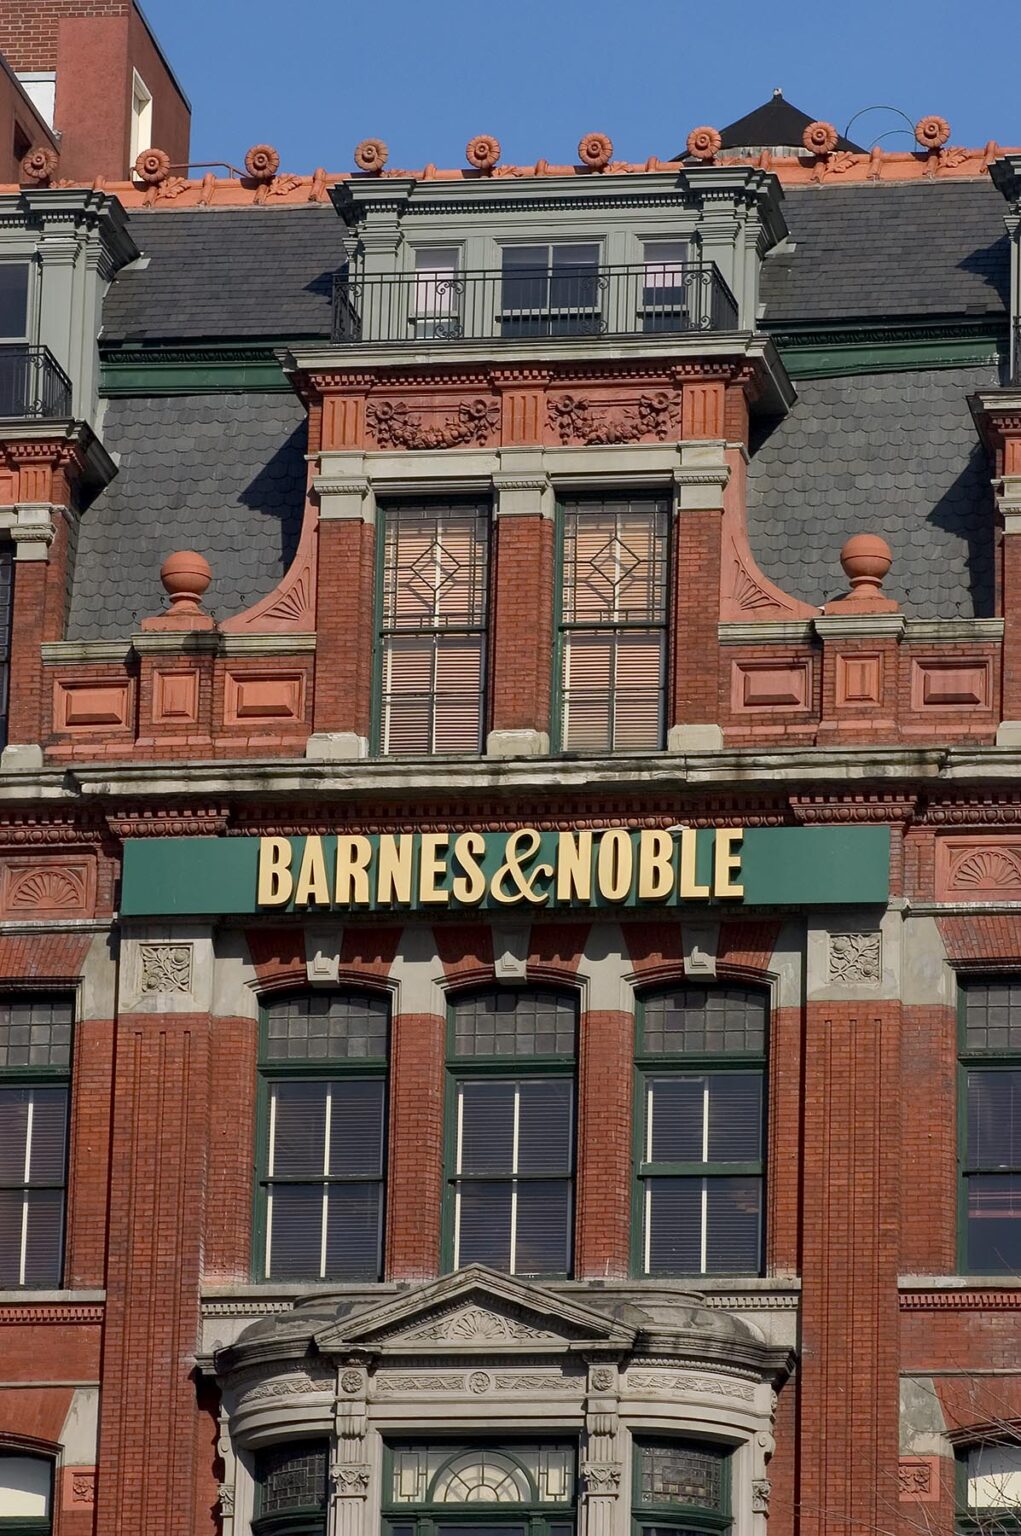 BARNES & NOBLE BOOK STORE in six story RED BRICK BUILDING in MANHATTAN - NEW YORK CITY, NEW YORK, USA